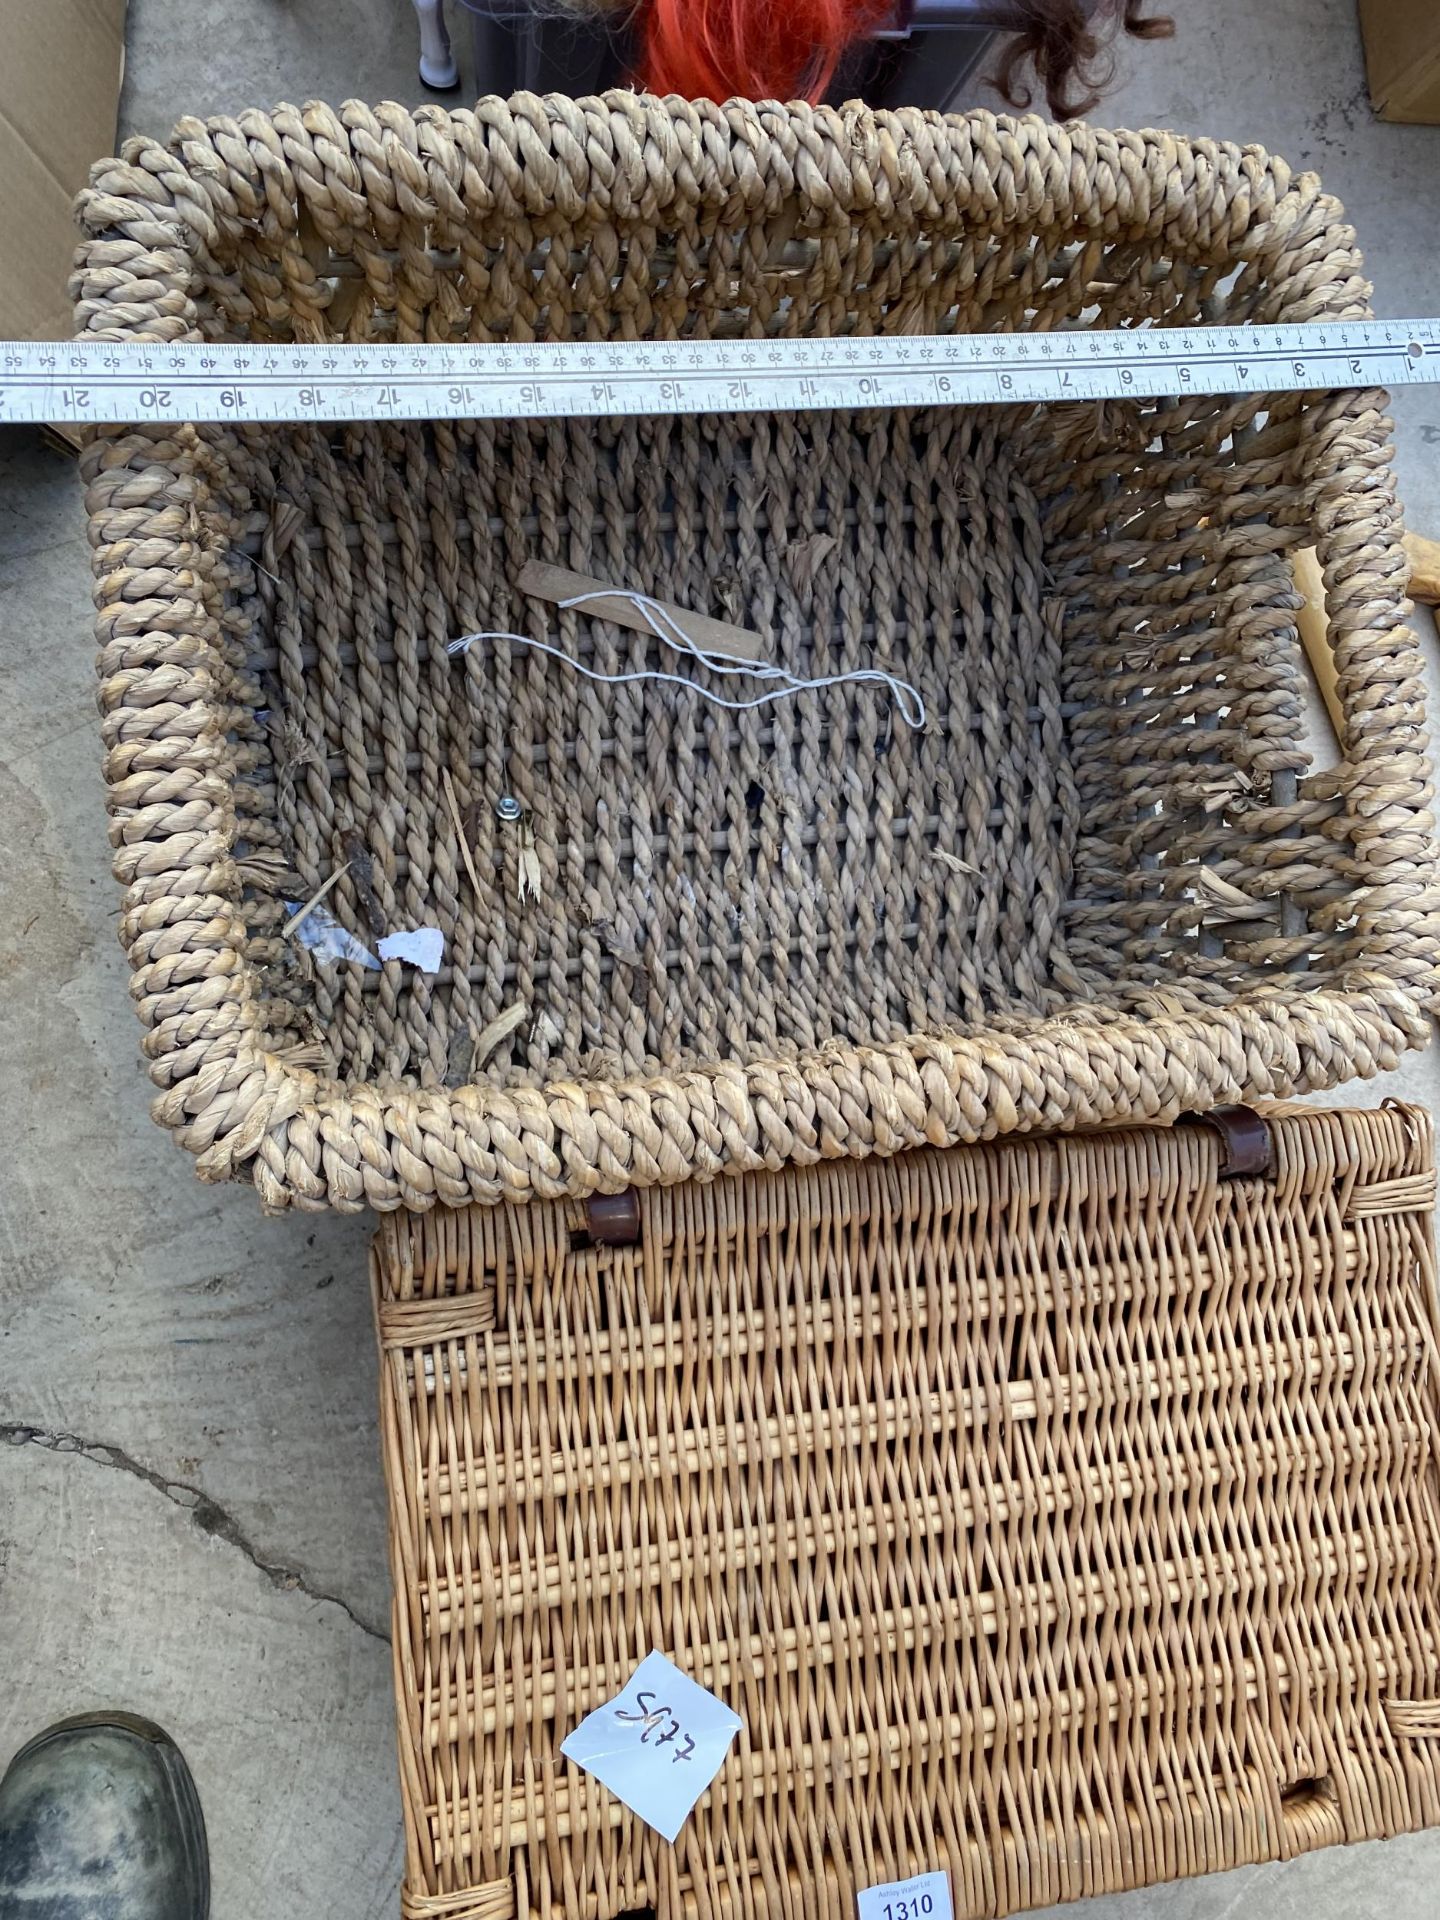 A WICKER PICNIC BASKET AND A FURTHER WICKER EFFECT LOG BASKET - Image 4 of 5